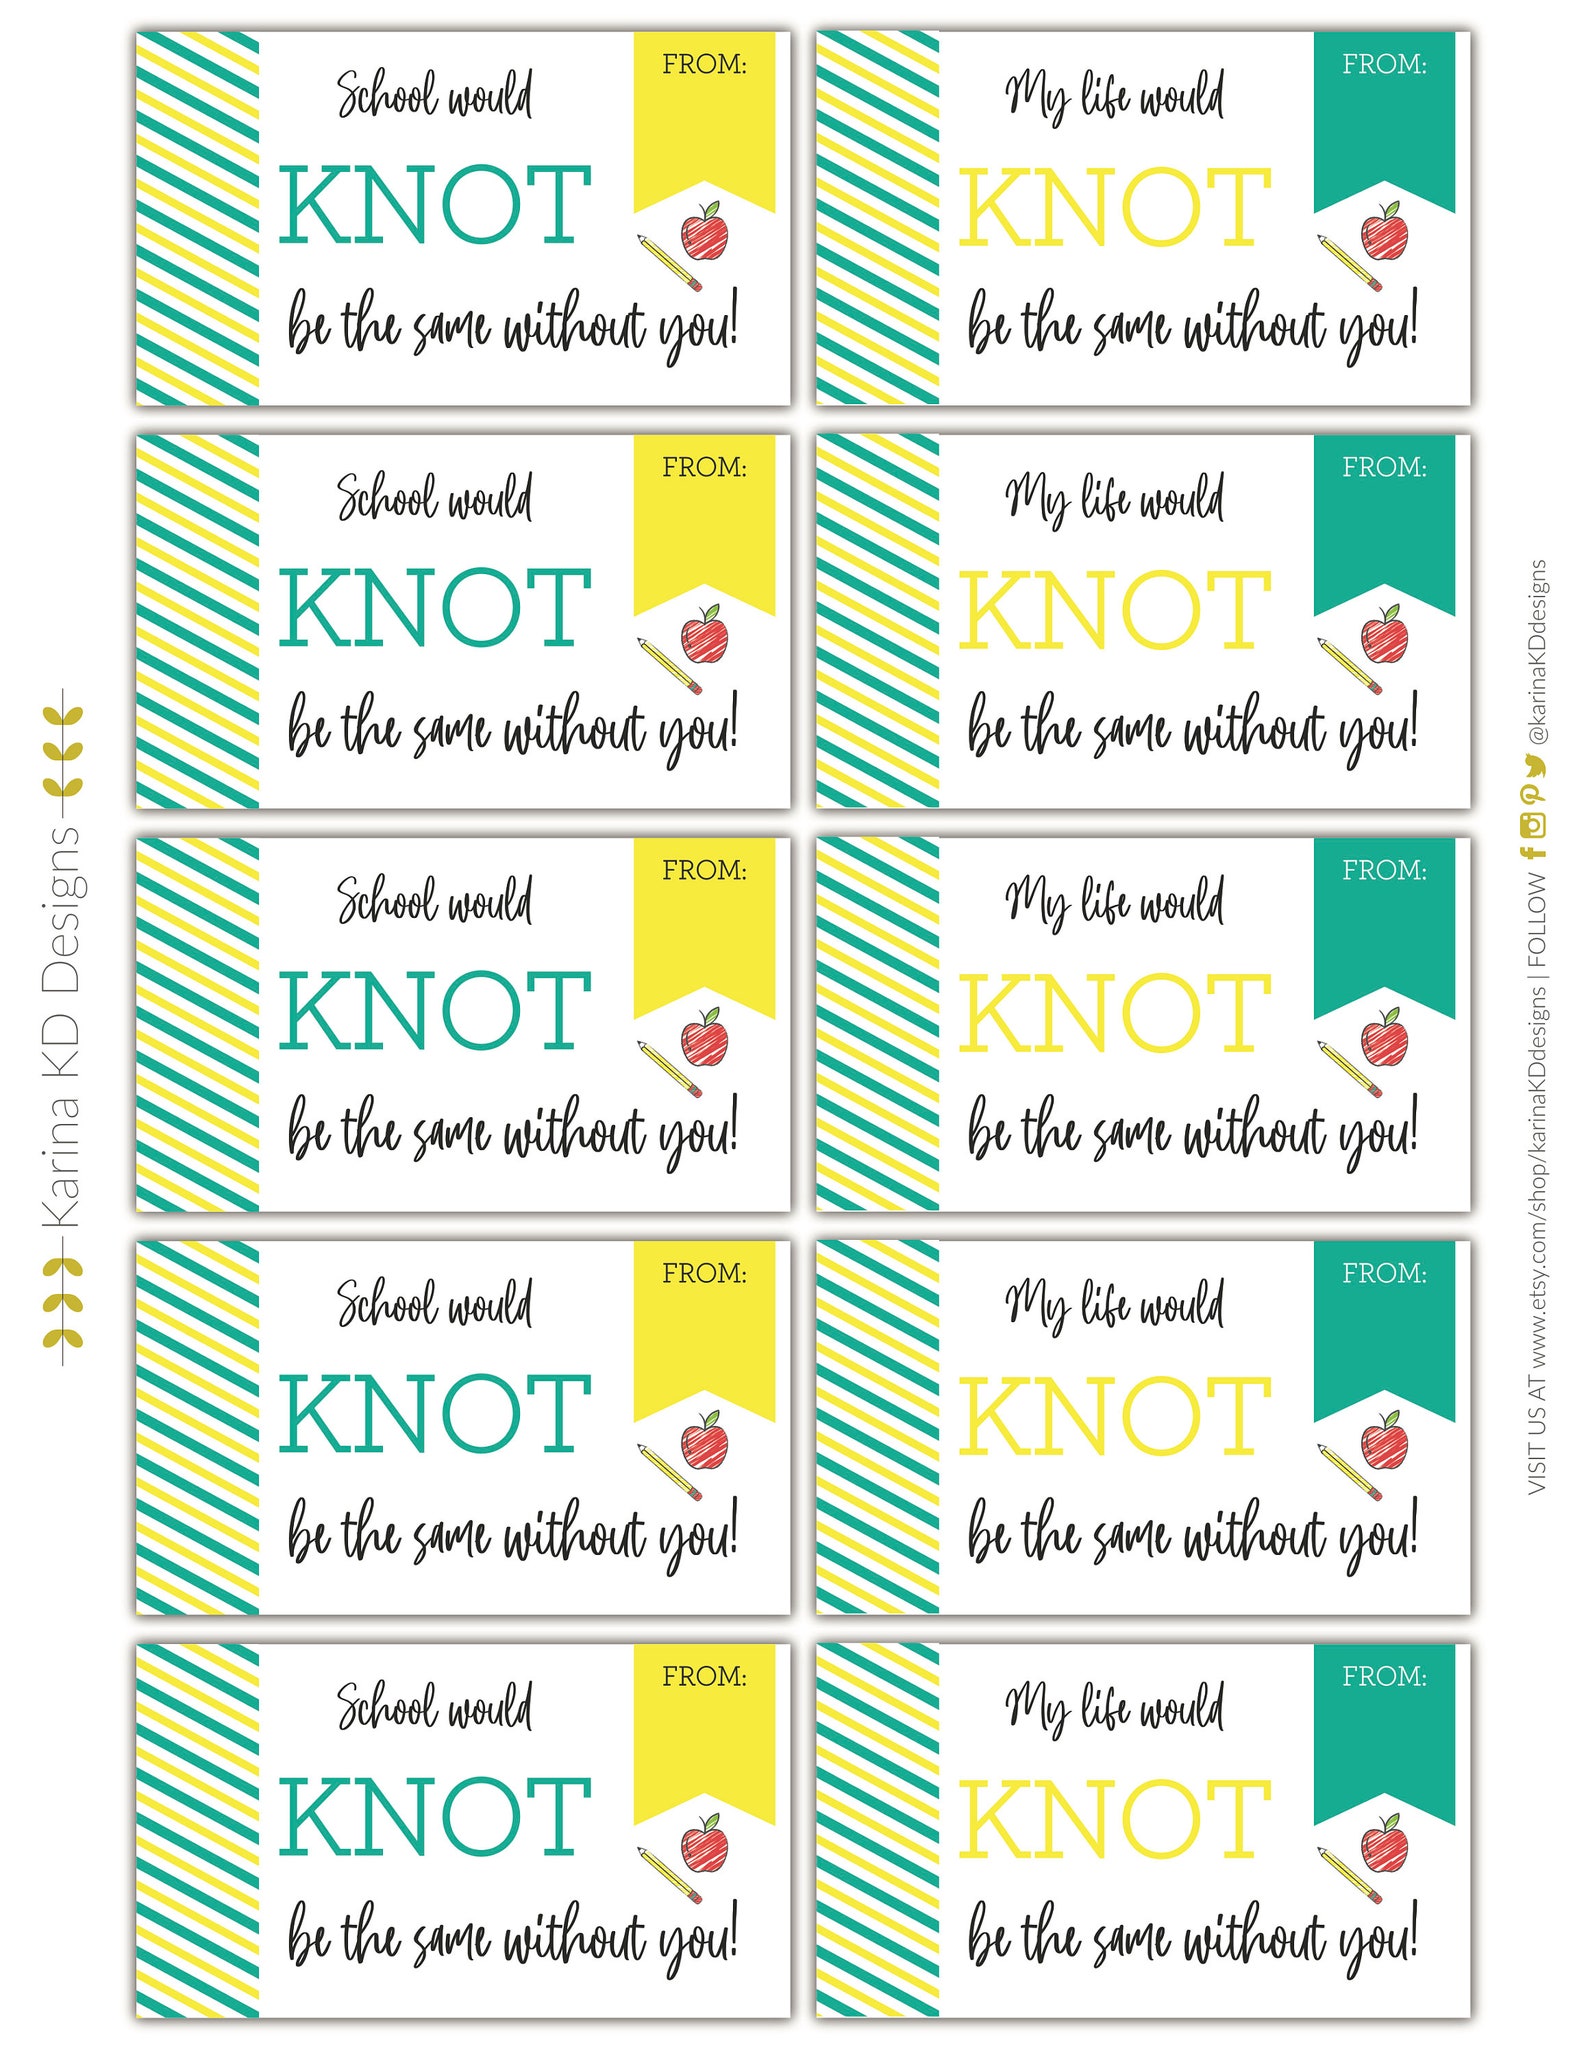 school-would-knot-be-the-same-without-you-tags-etsy